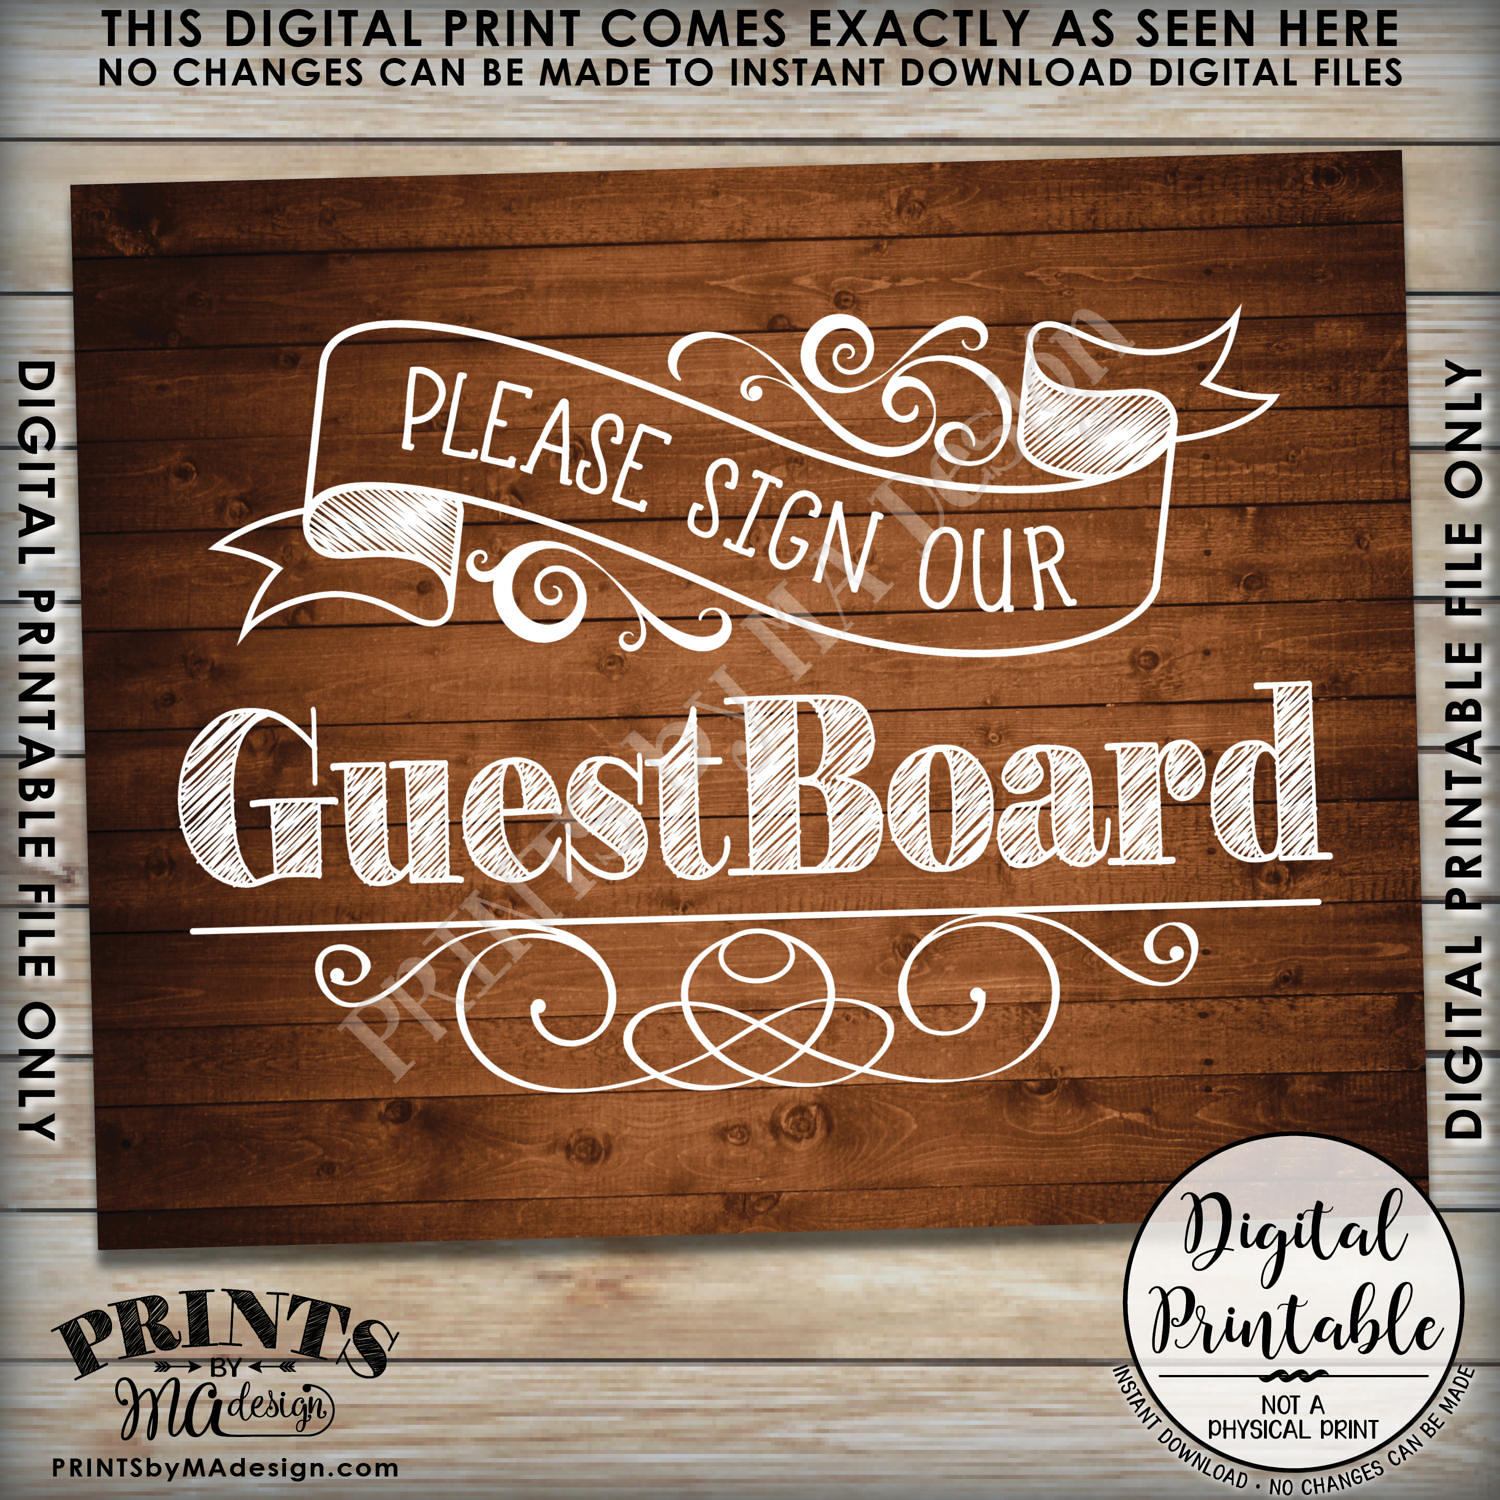 guestboard-sign-wedding-board-please-sign-our-guest-board-wedding